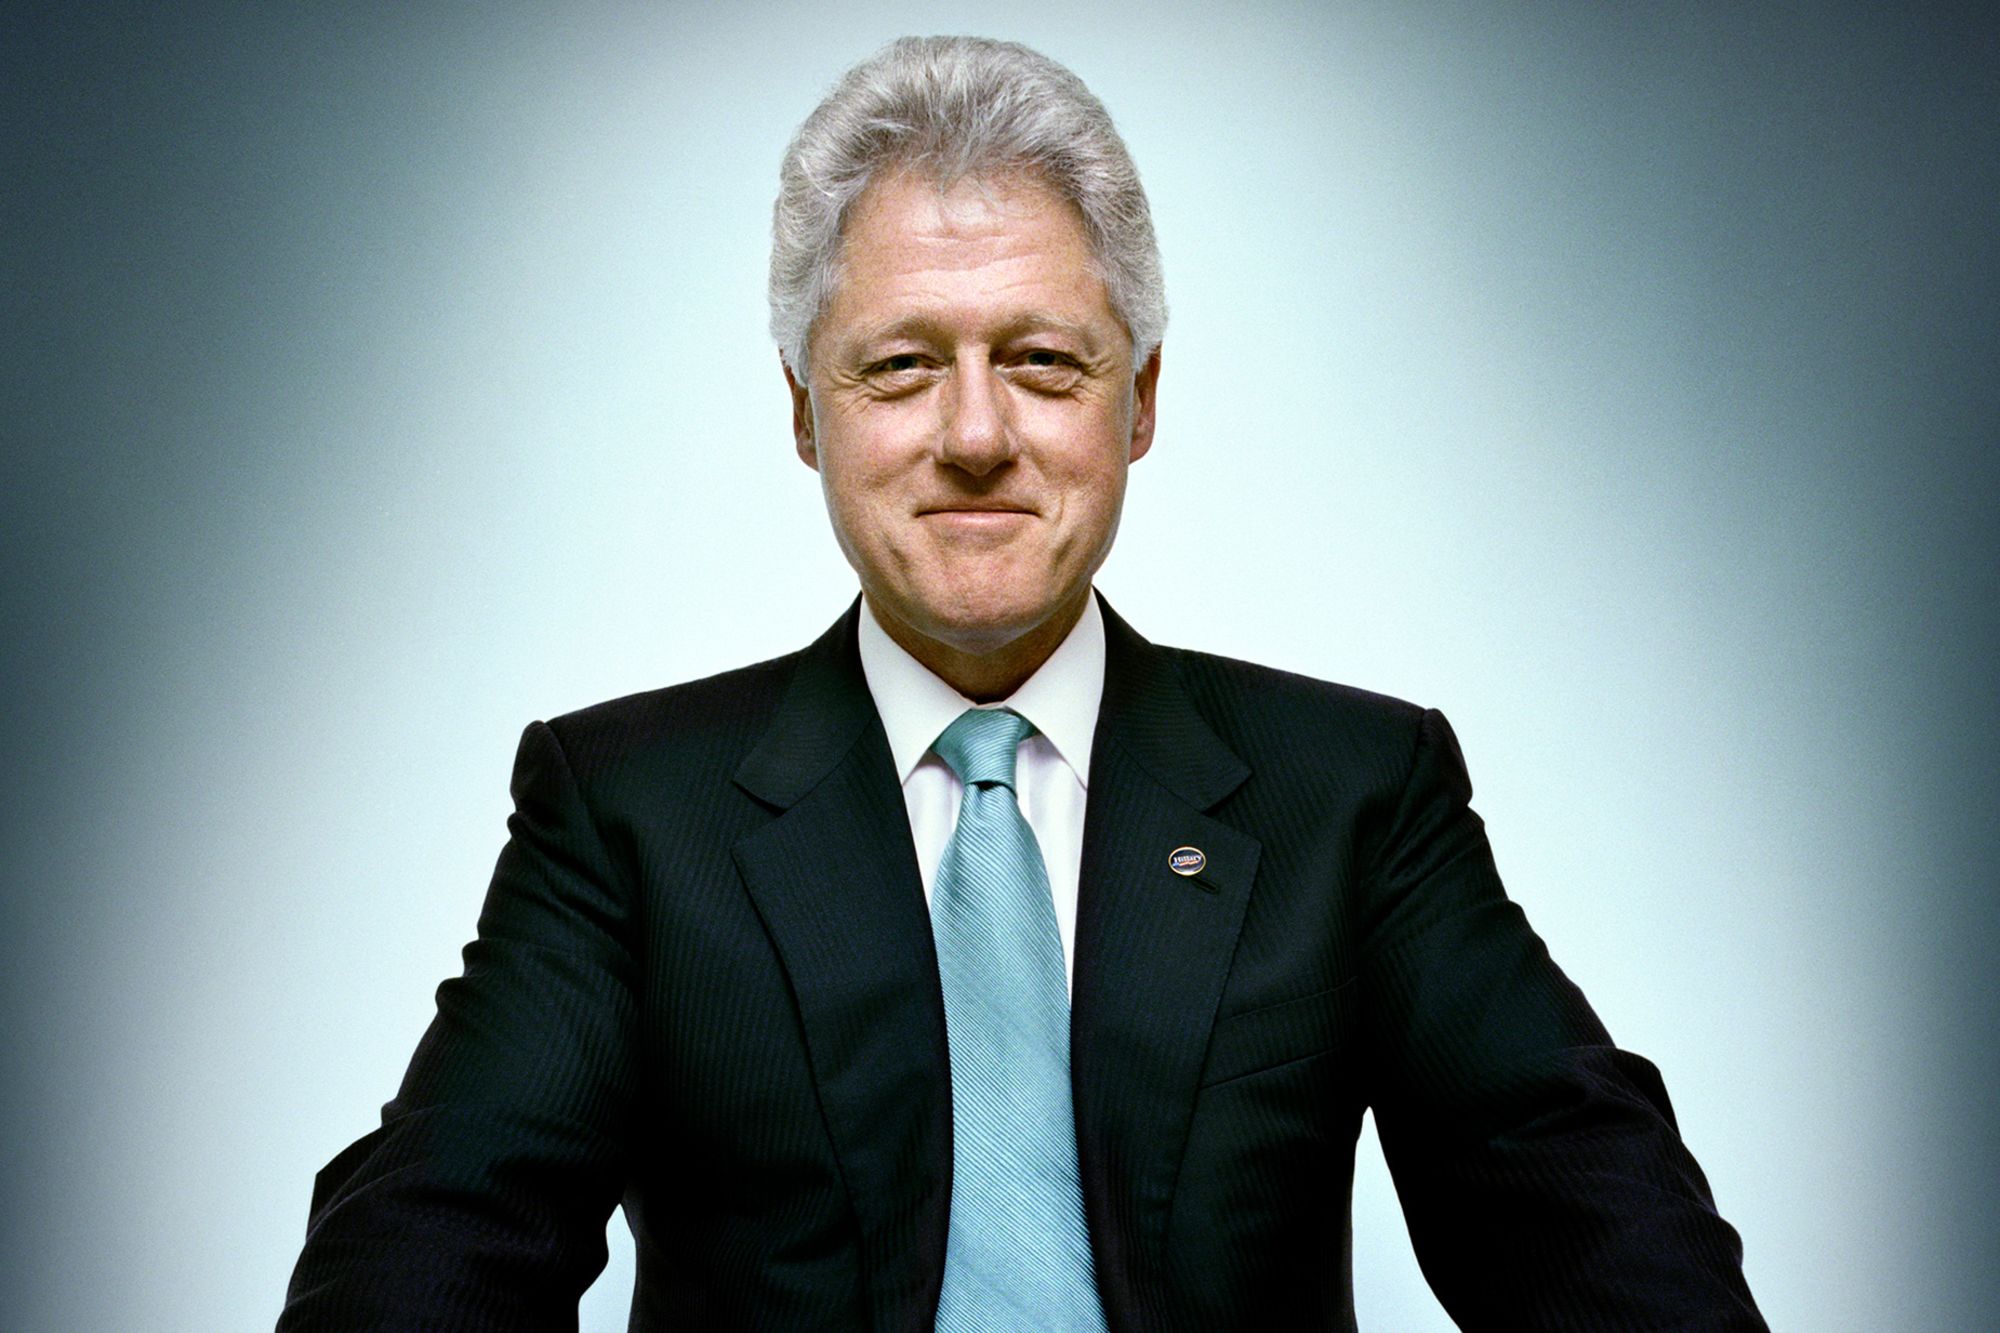 Platon is known for his portraits of both presidents and Hollywood stars, political dissidents, abuse survivors and immigrants. This portrait of Bill Clinton was used as the December 2000 cover of Esquire magazine. 